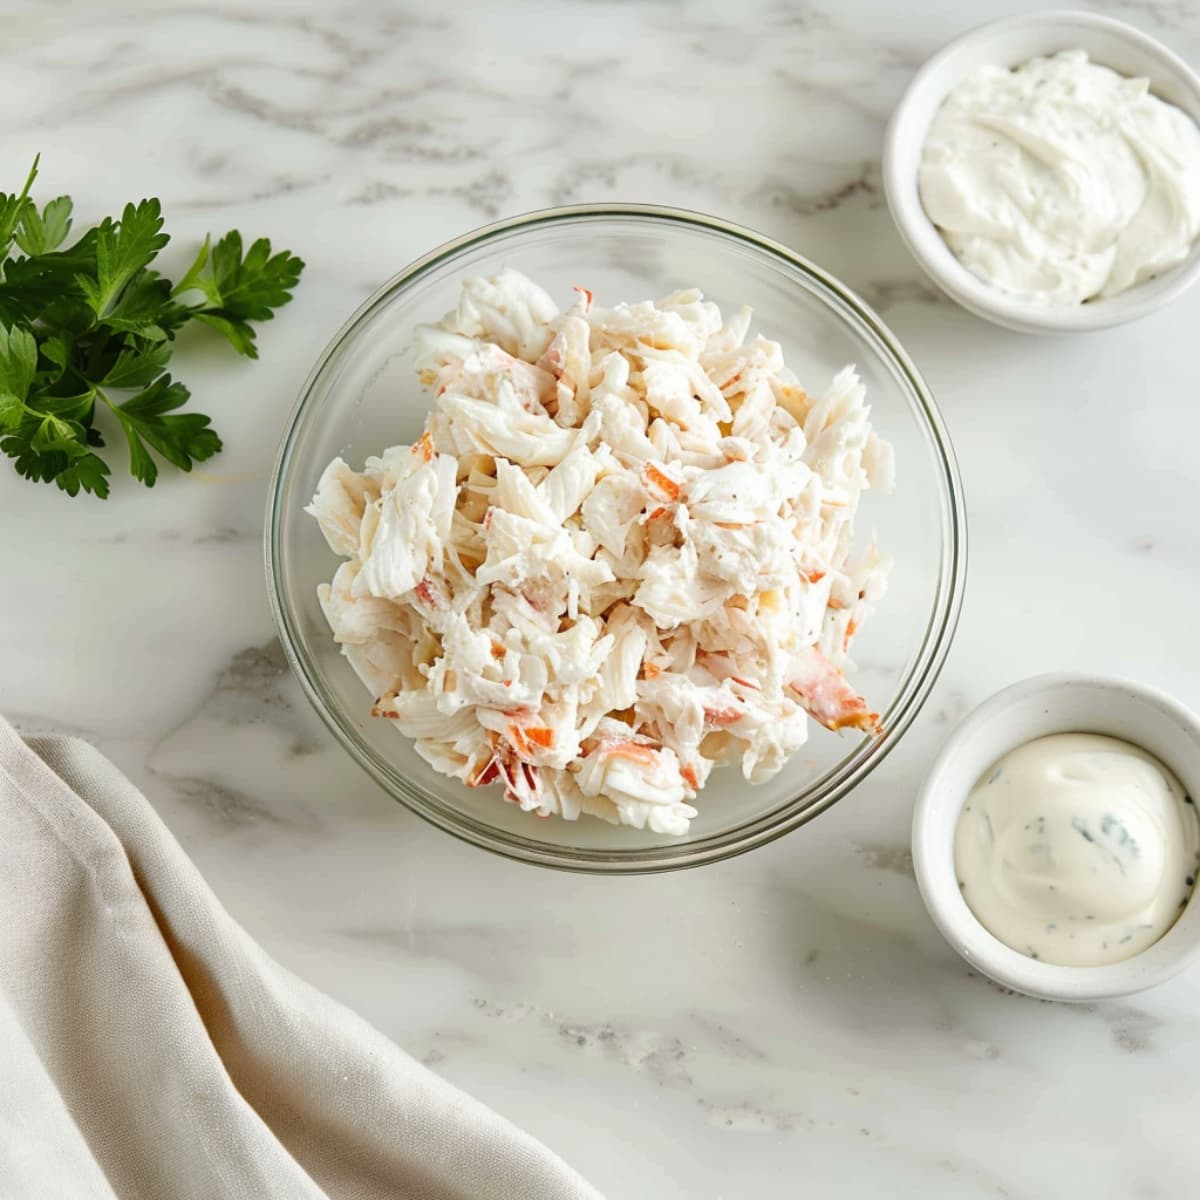 A glass bowl of lump crab meat with sour cream and cream cheese